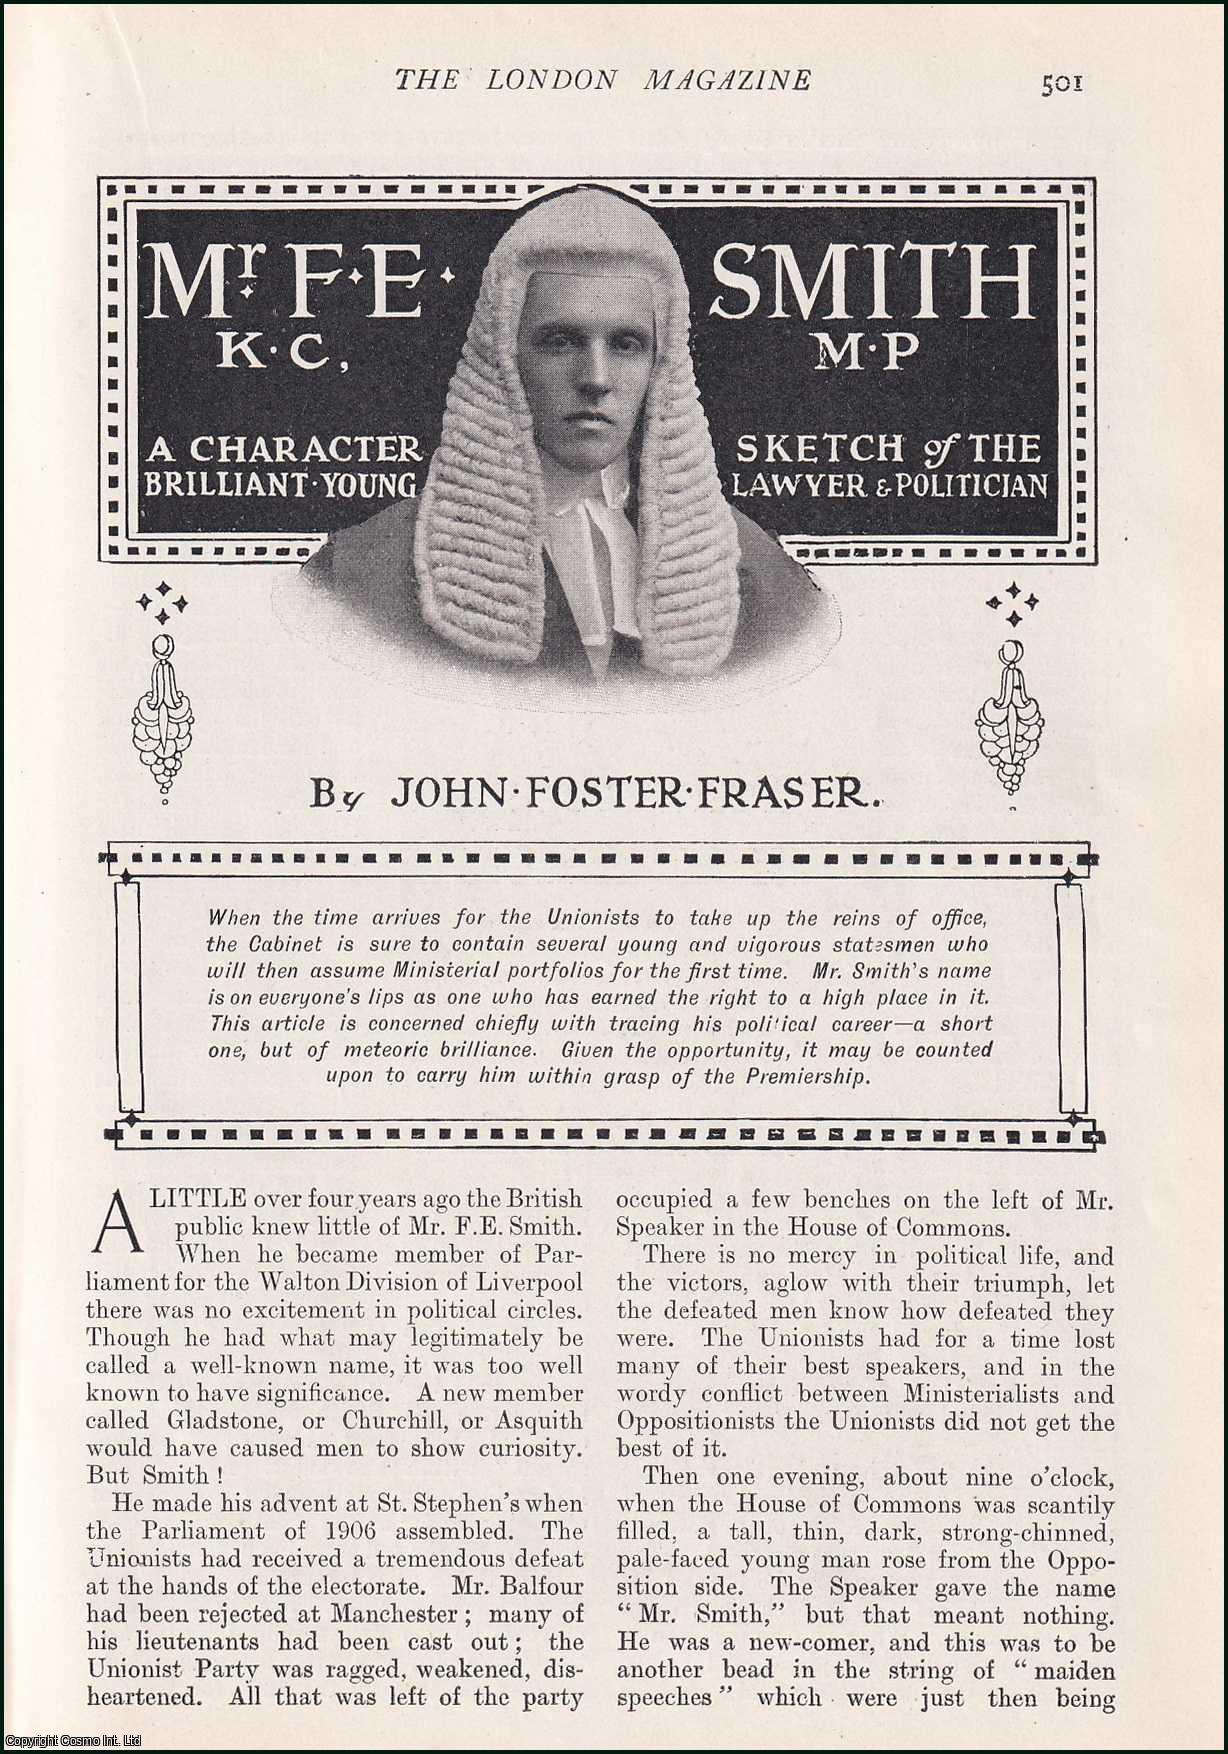 John Foster Fraser - Mr. F.E. Smith, K.C., M.P. A Character sketch of the Lawyer & Politician. An uncommon original article from the Harmsworth London Magazine, 1910.